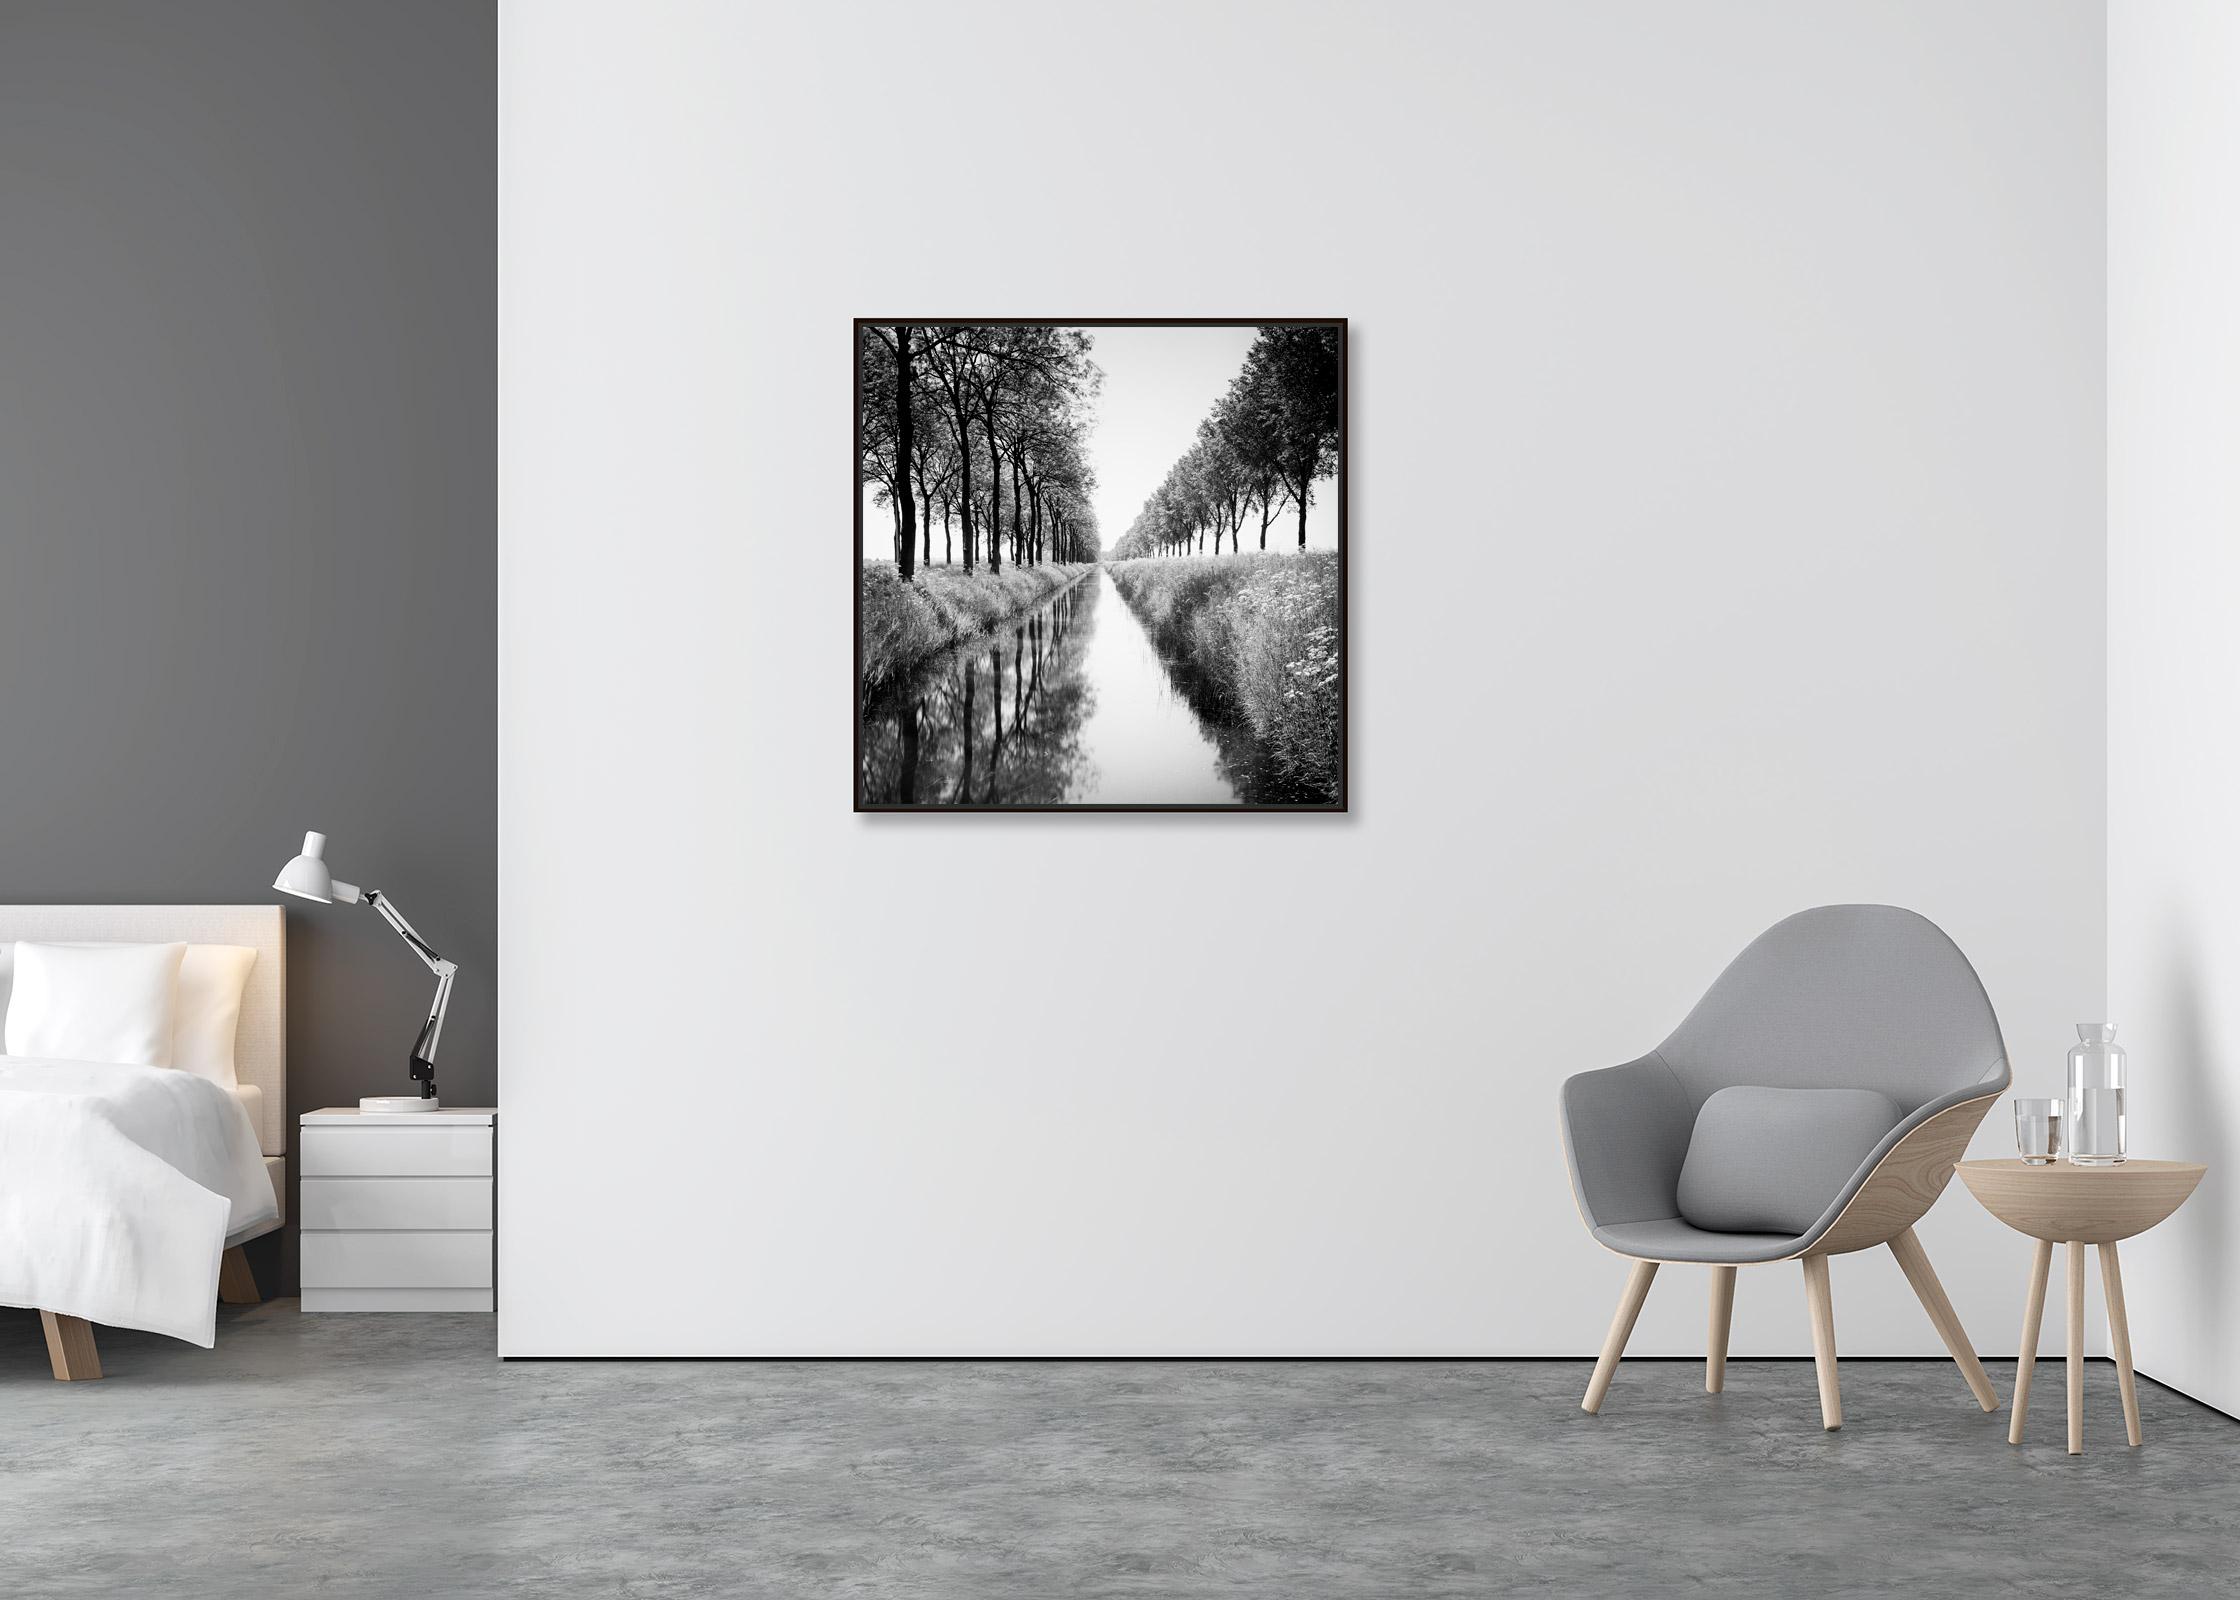 Gracht, Tree Avenue, water reflection, black and white photography art print - Contemporary Photograph by Gerald Berghammer